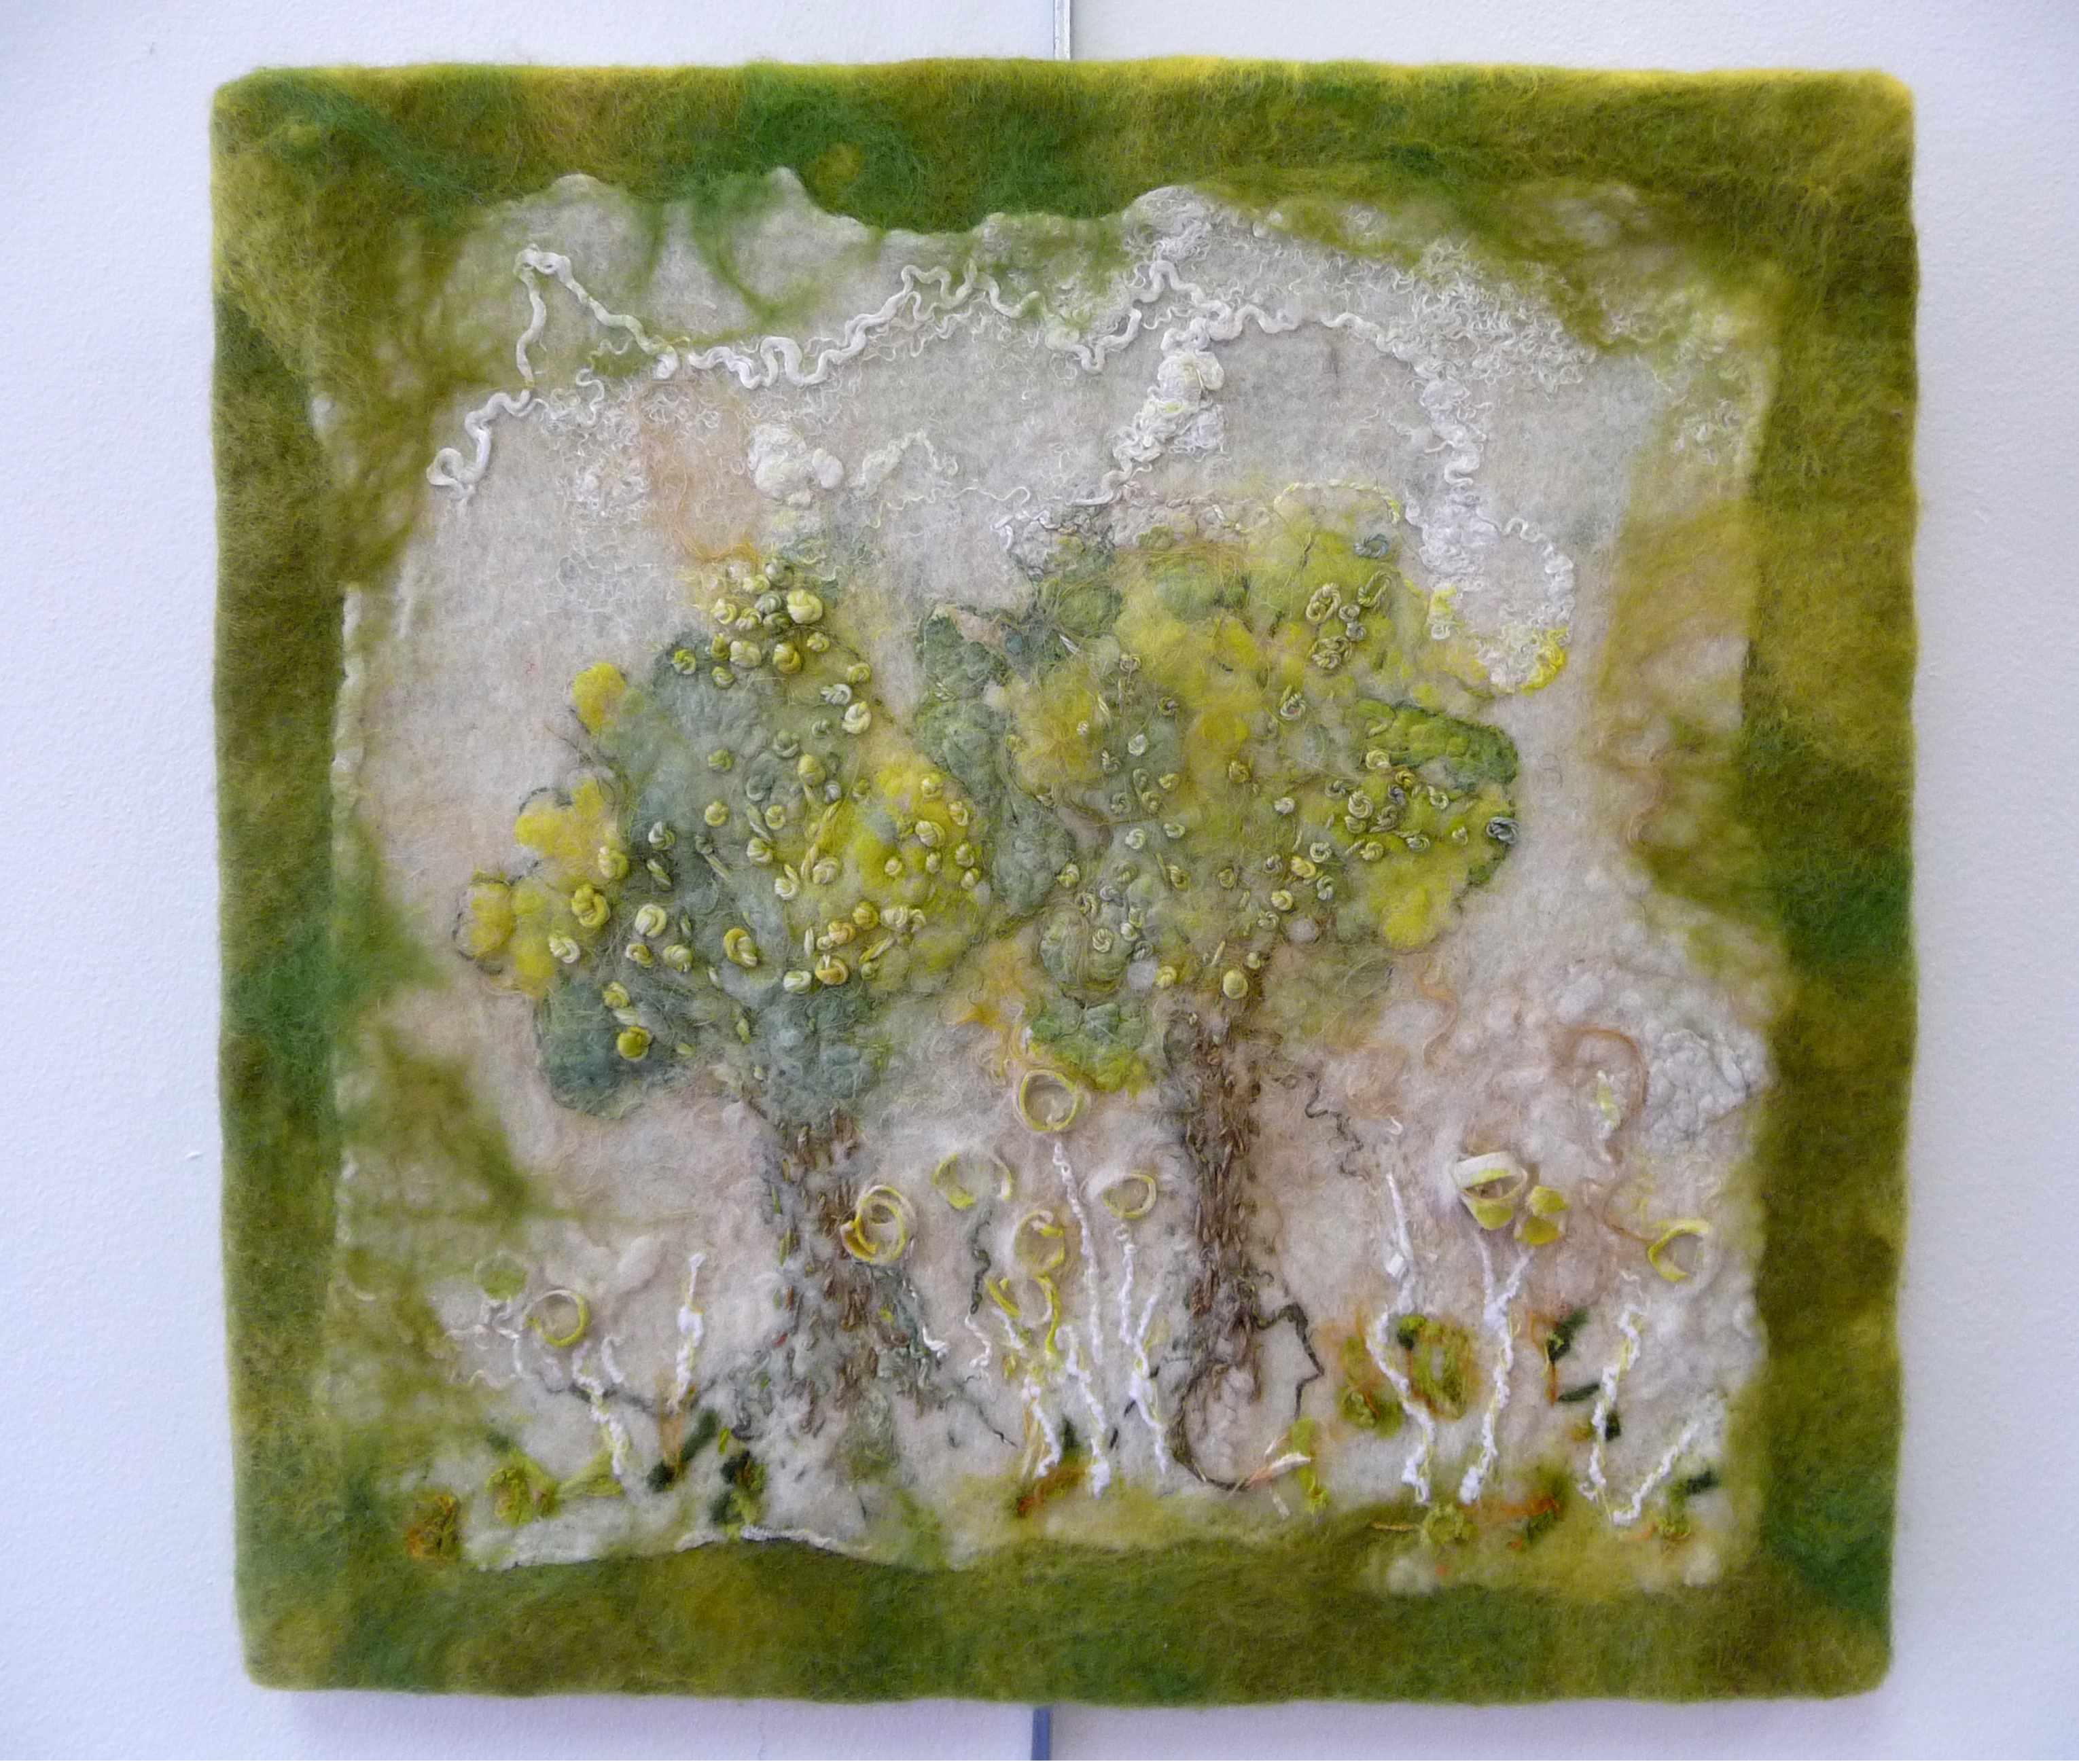 TREE FELT by Sue Tyldesley, felted and stitched